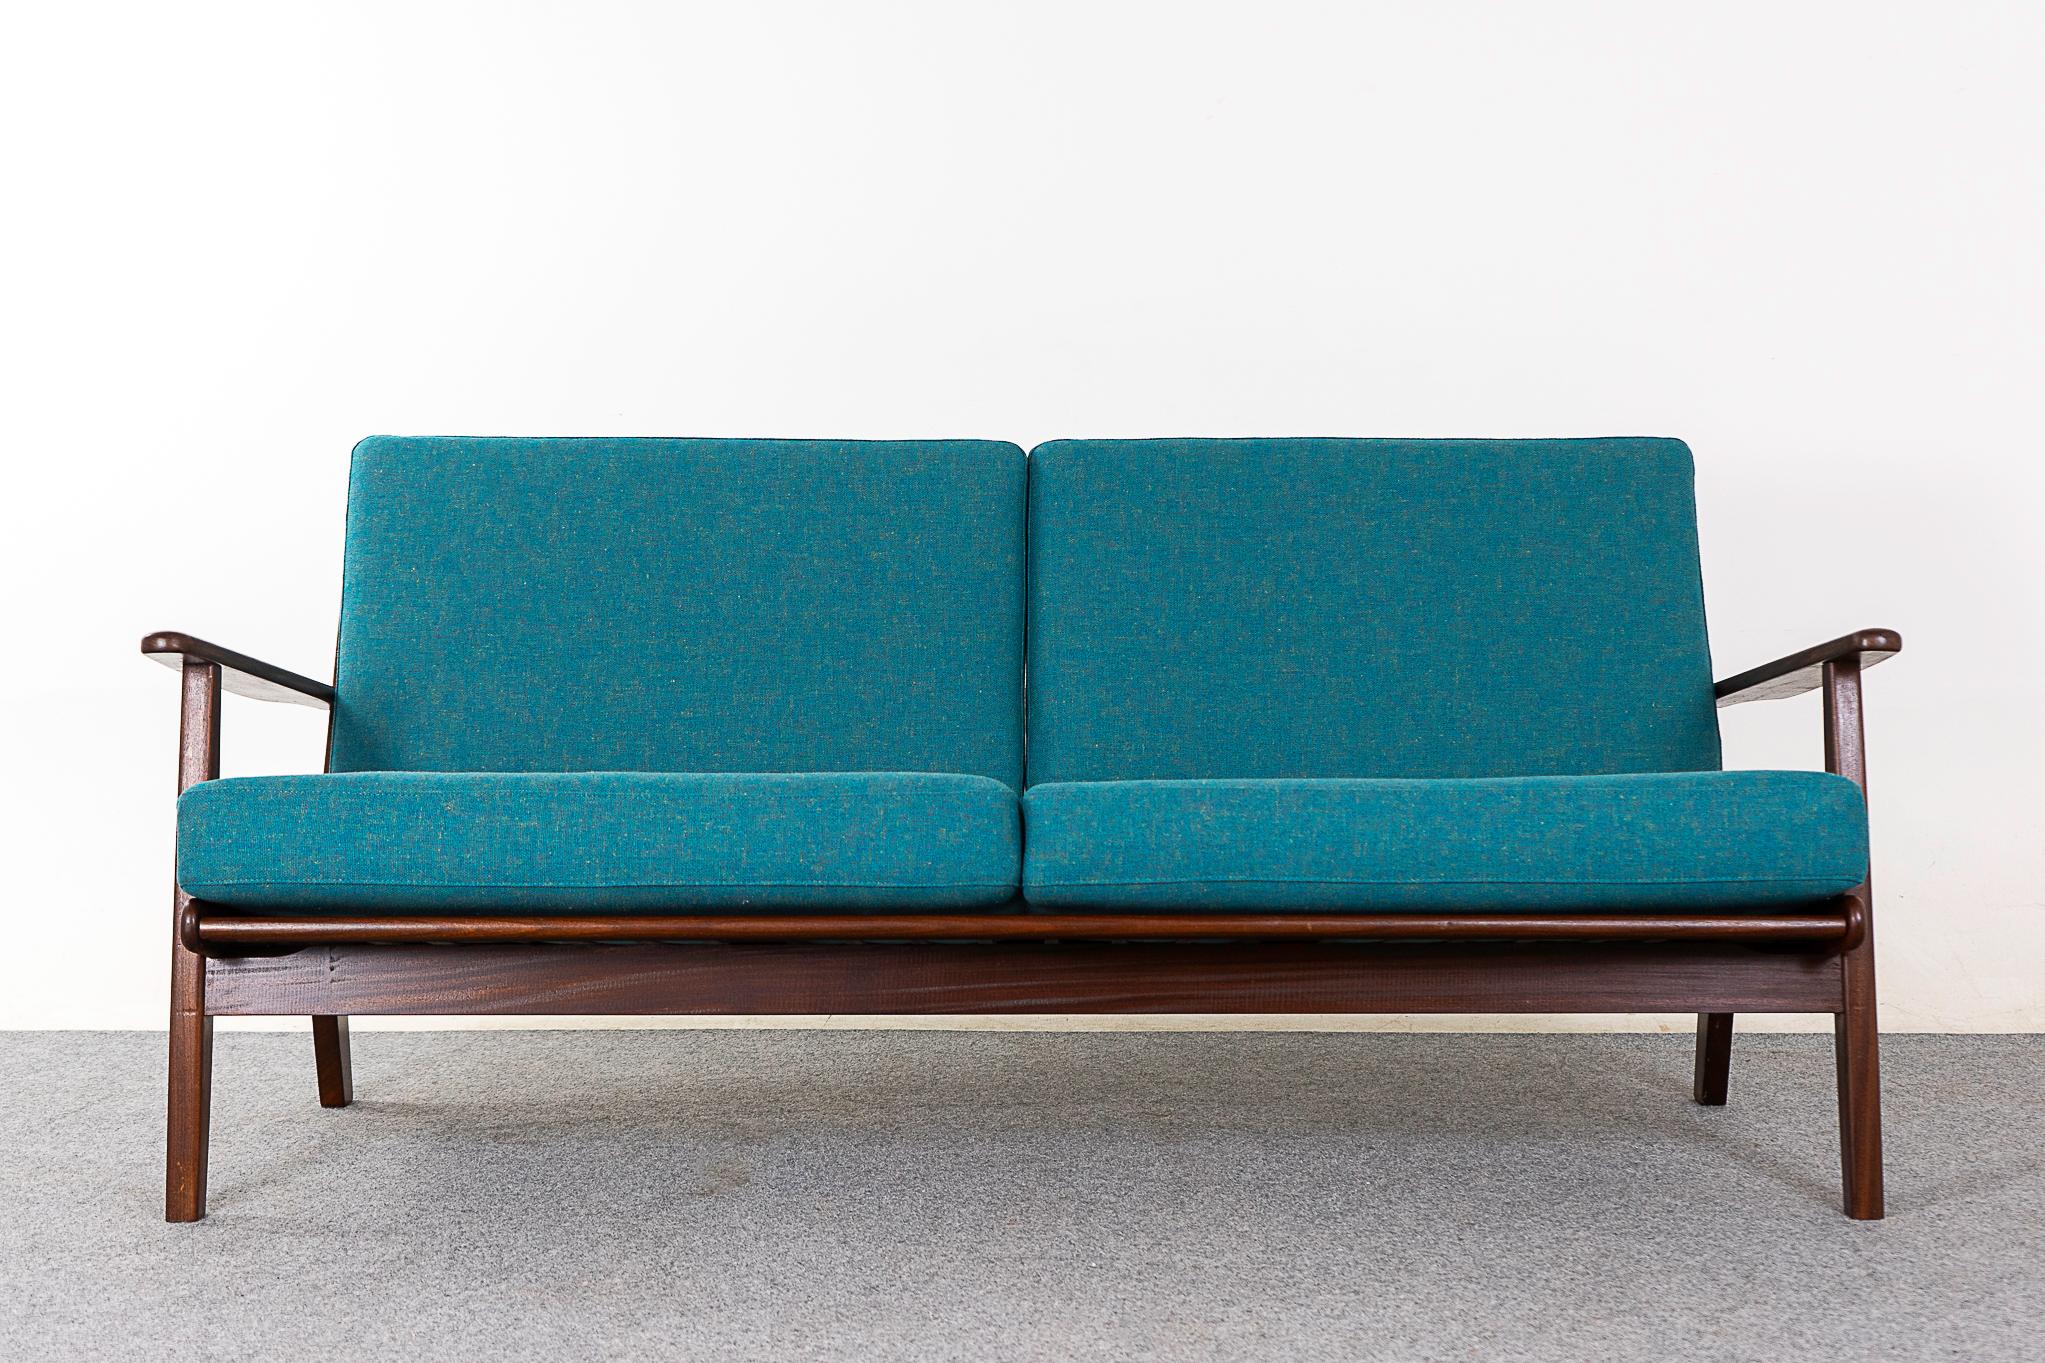 Teak mid-century sofa, circa 1960's. Beautiful, deep rich tone afromosia teak frame with angular lines. Terrific teal upholstery in a blend of 70% pure new wool and 30% flax!  